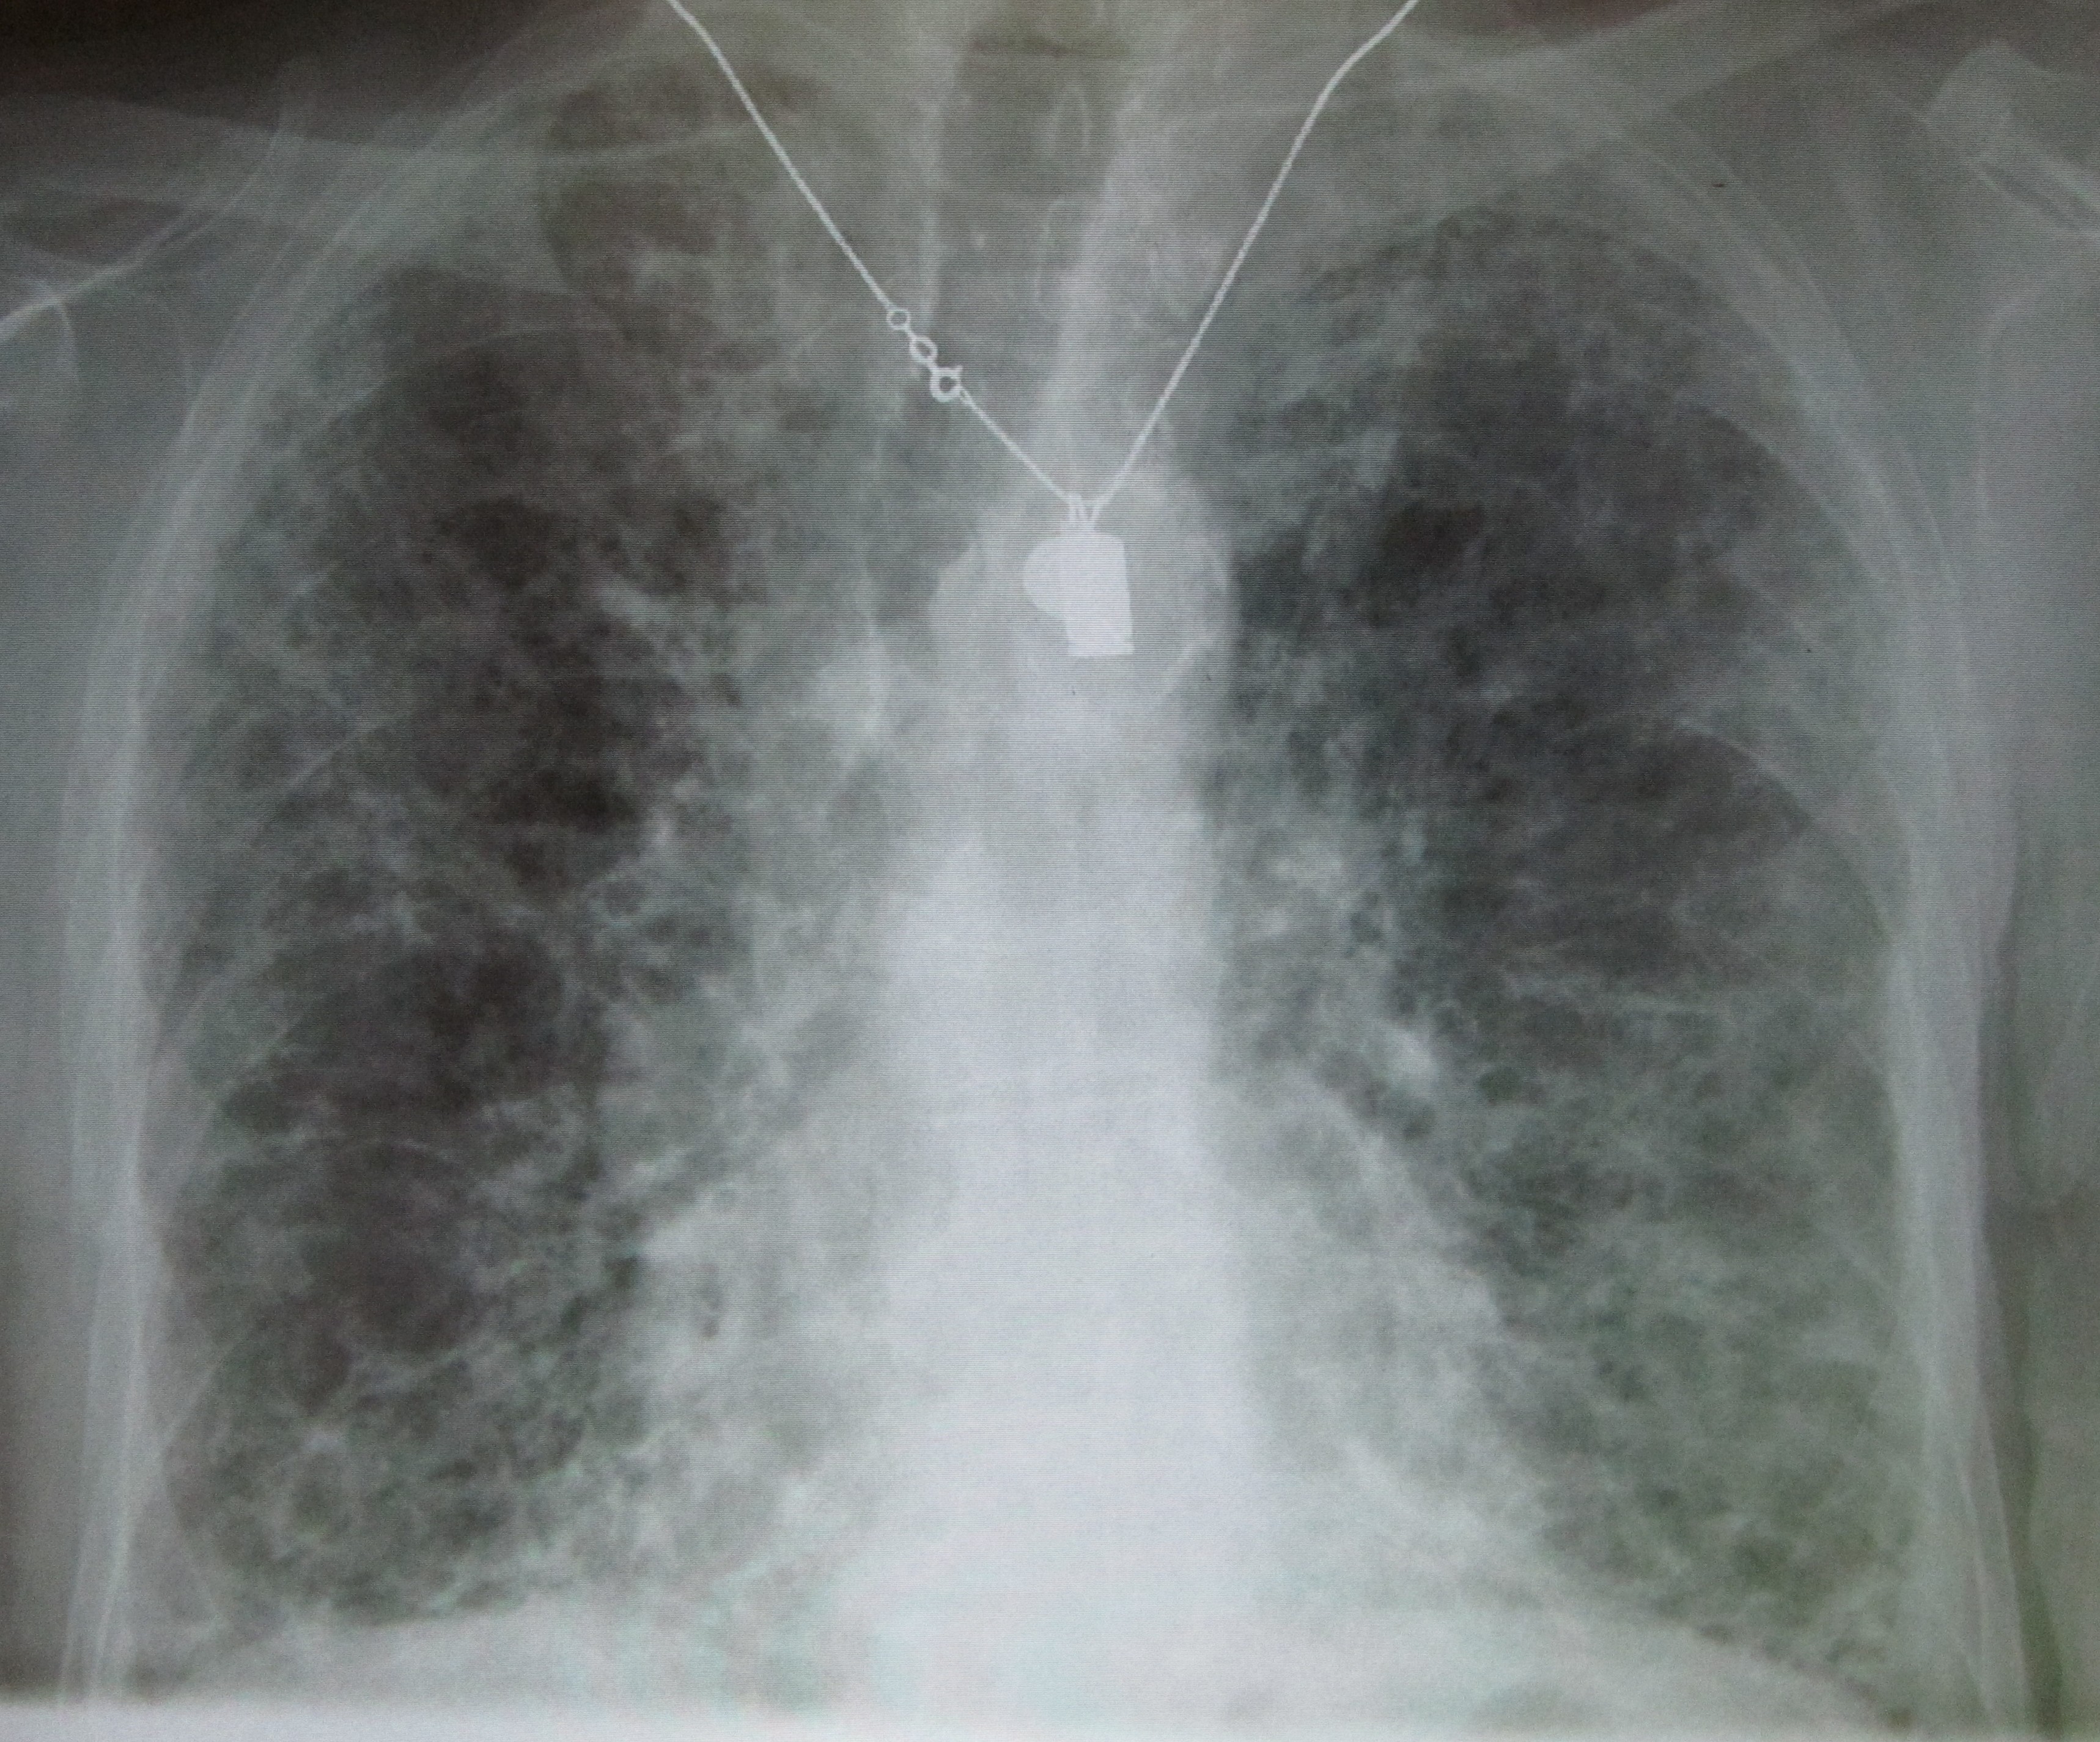 Visible lung fibrosis induced by the heart medication amiodarone